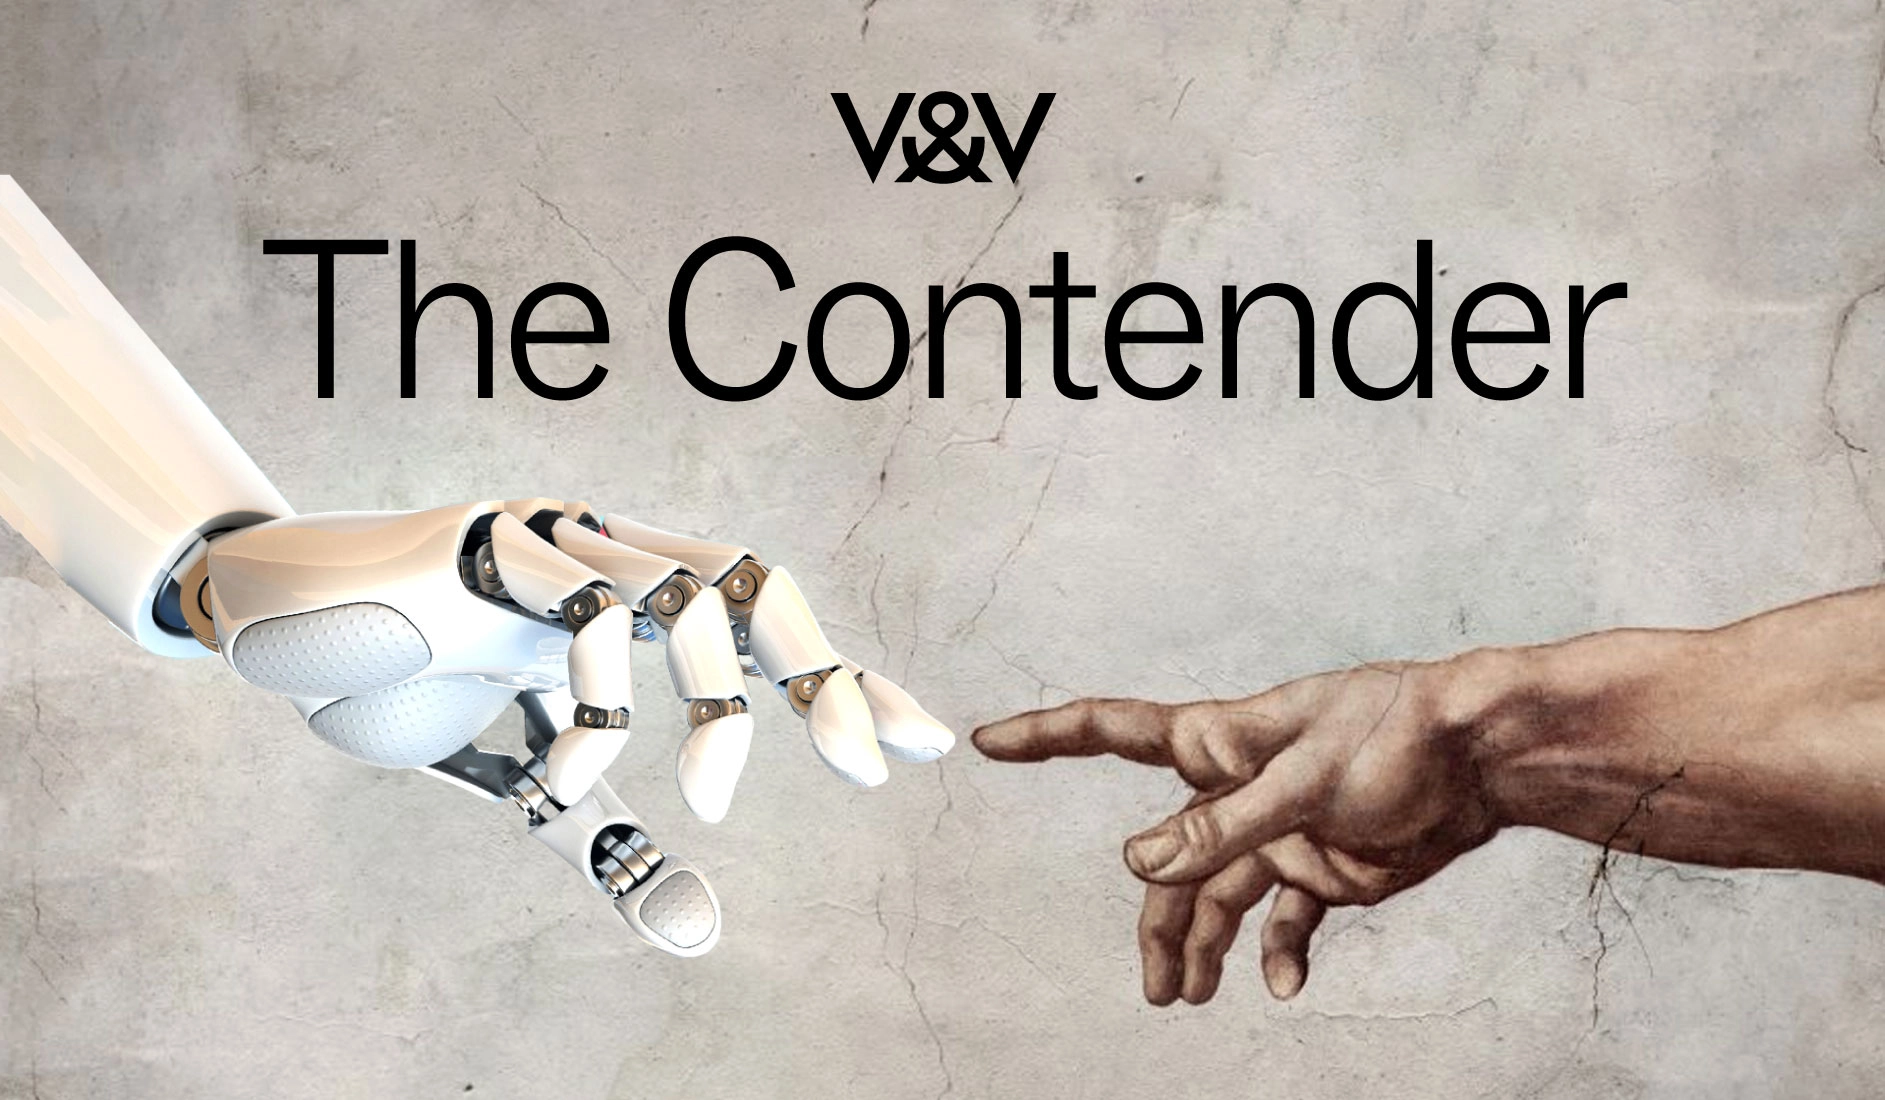 An image of a robotic and human hand touching with the words "The Contender"